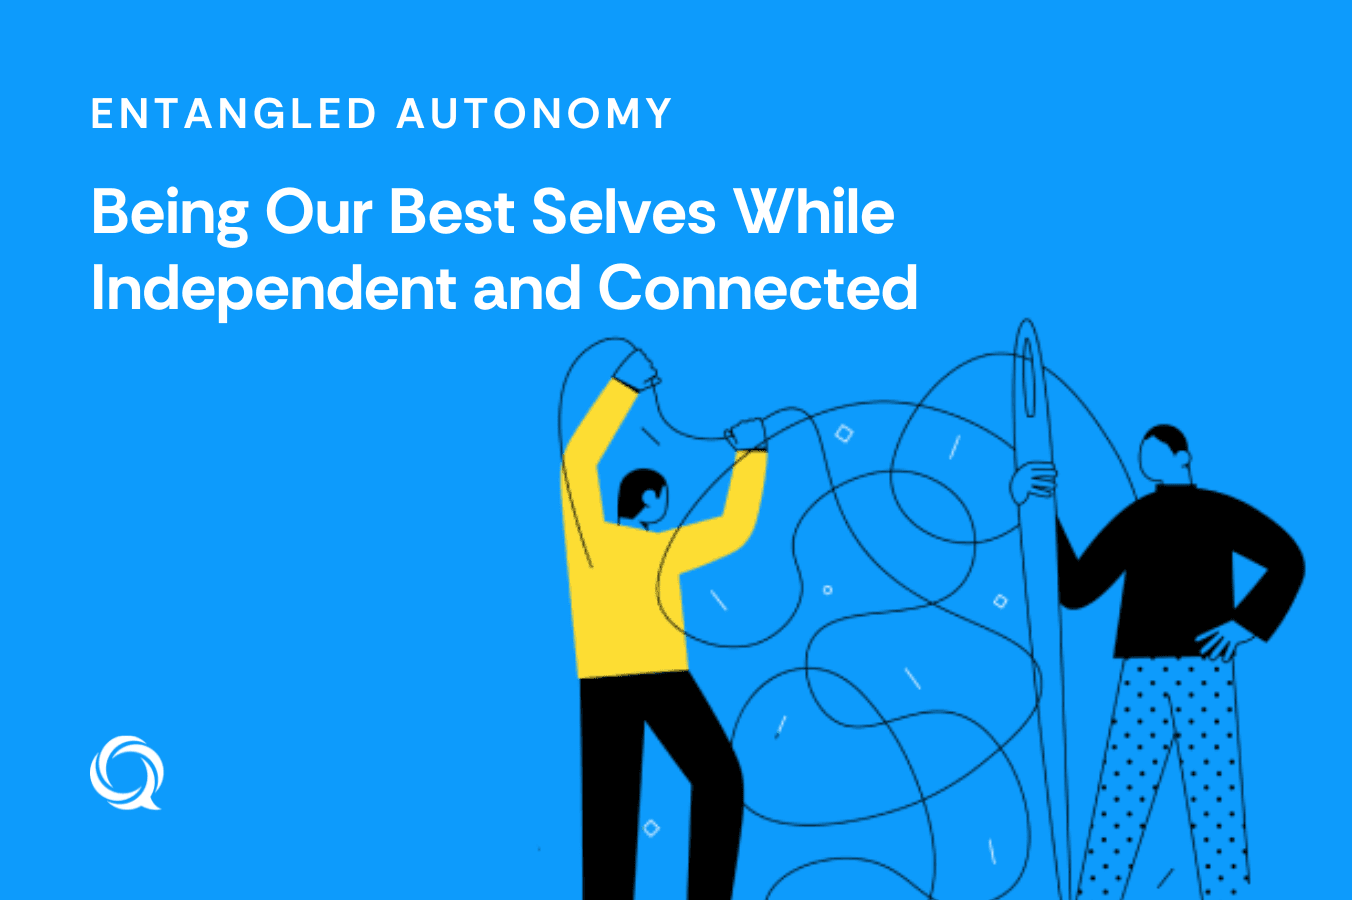 Entangled Autonomy: Being Our Best Selves While Independent and Connected